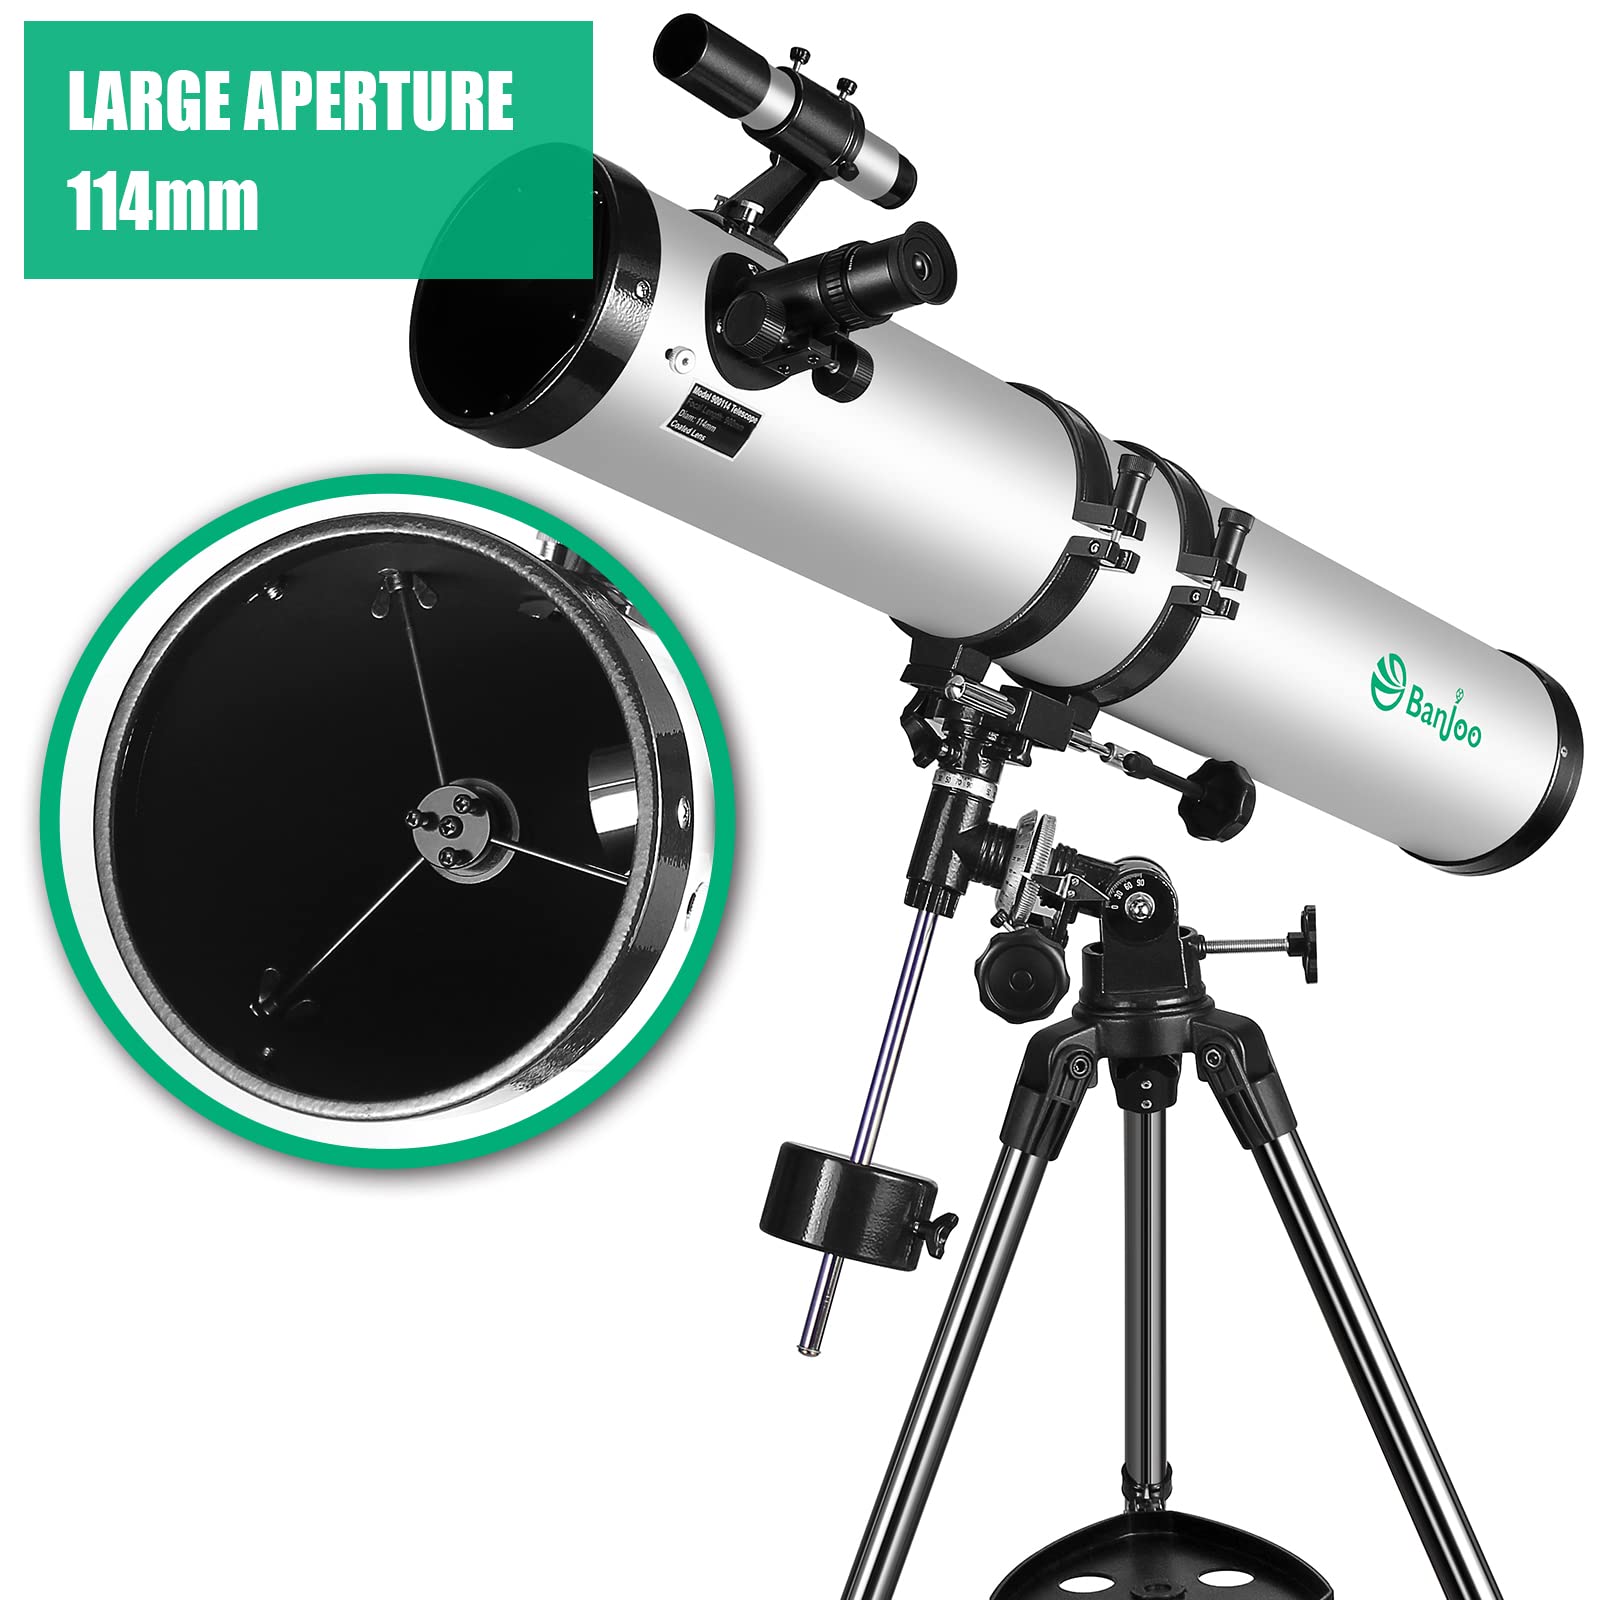 114EQ Telescope, 900mm Telescopes for Adults Astronomy with German Technology Equatorial, Fully- Coated Glass Optics Professional Newtonian Reflector Telescopes for Astronomy Beginners